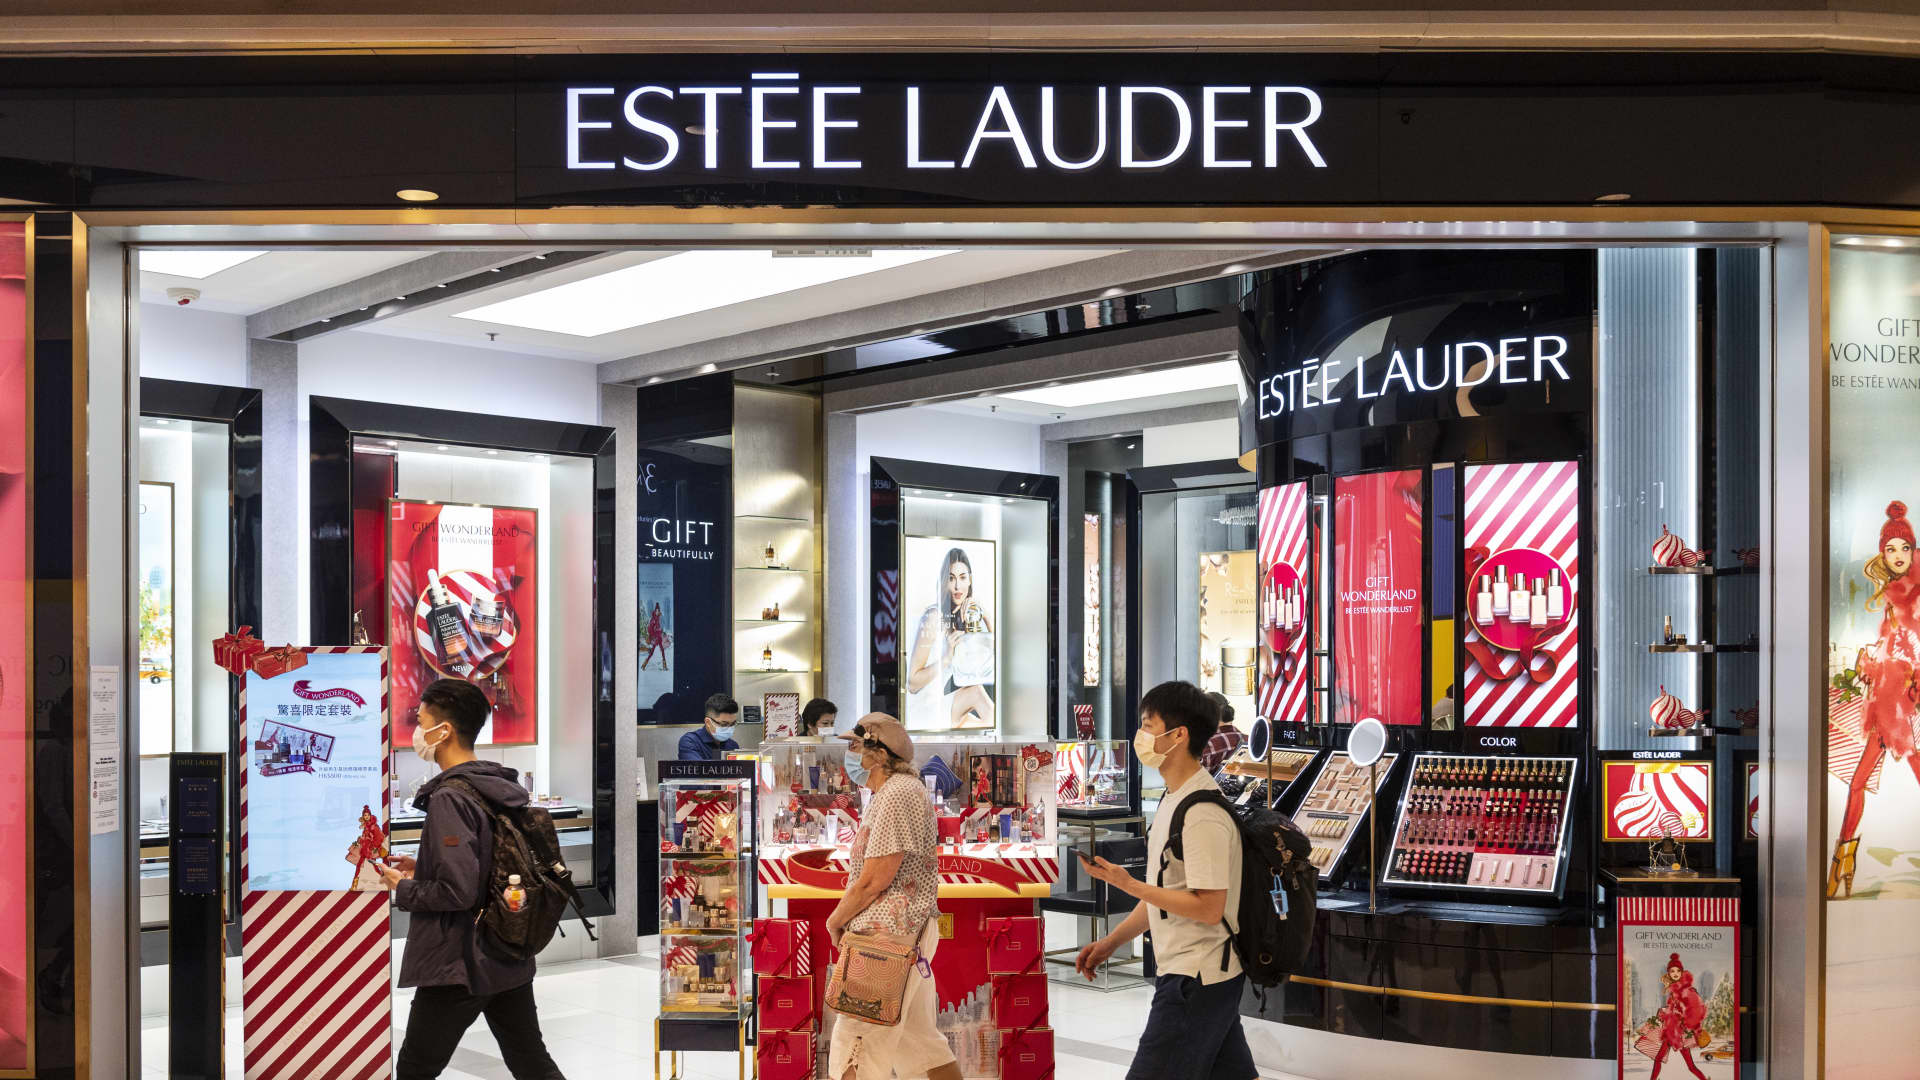 Stocks making the biggest moves midday: Estee Lauder, Yum China, Paycom Software and more